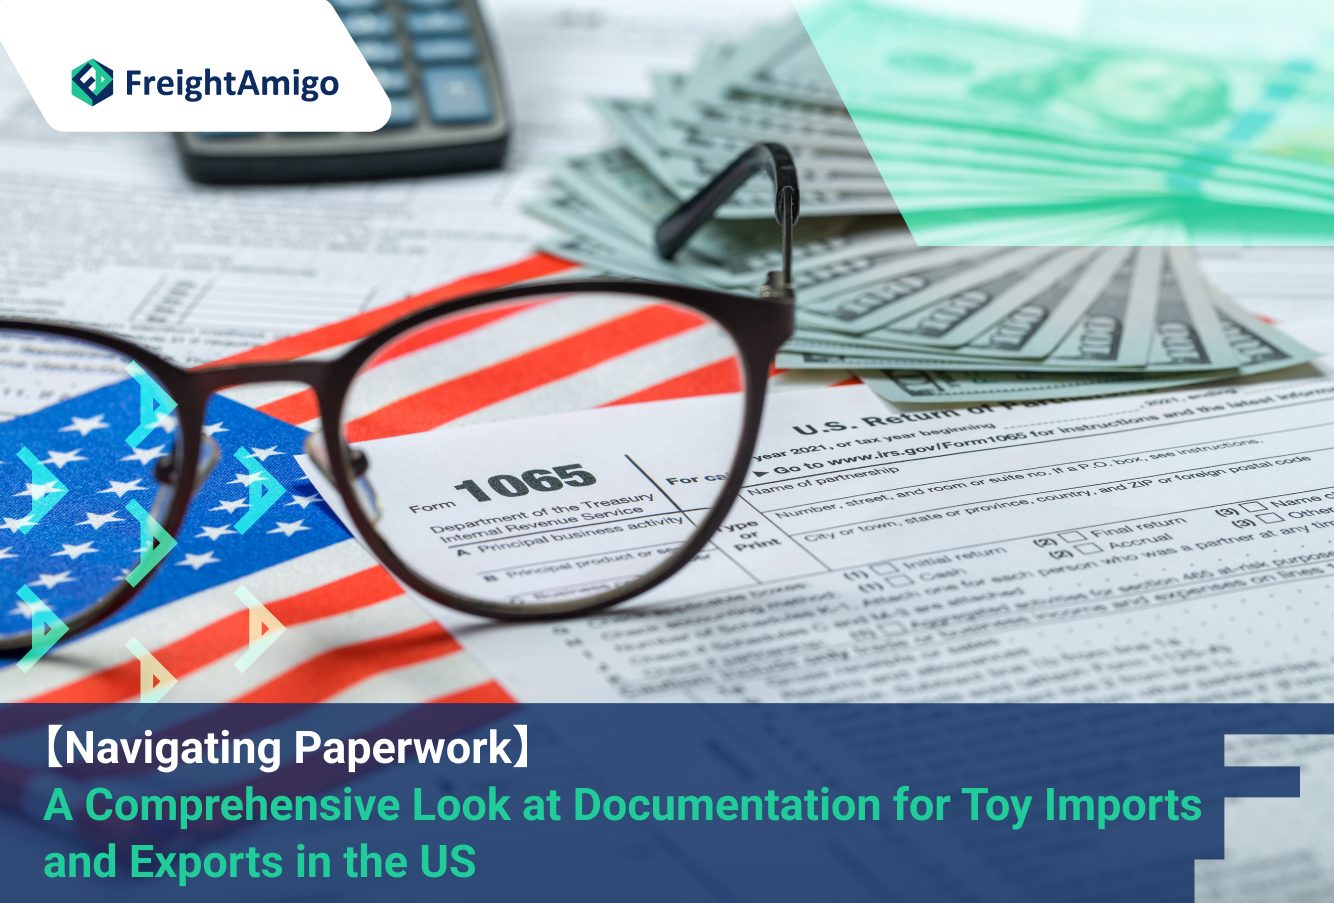 【Navigating Paperwork】 A Comprehensive Look at Documentation for Toy Imports and Exports in the US